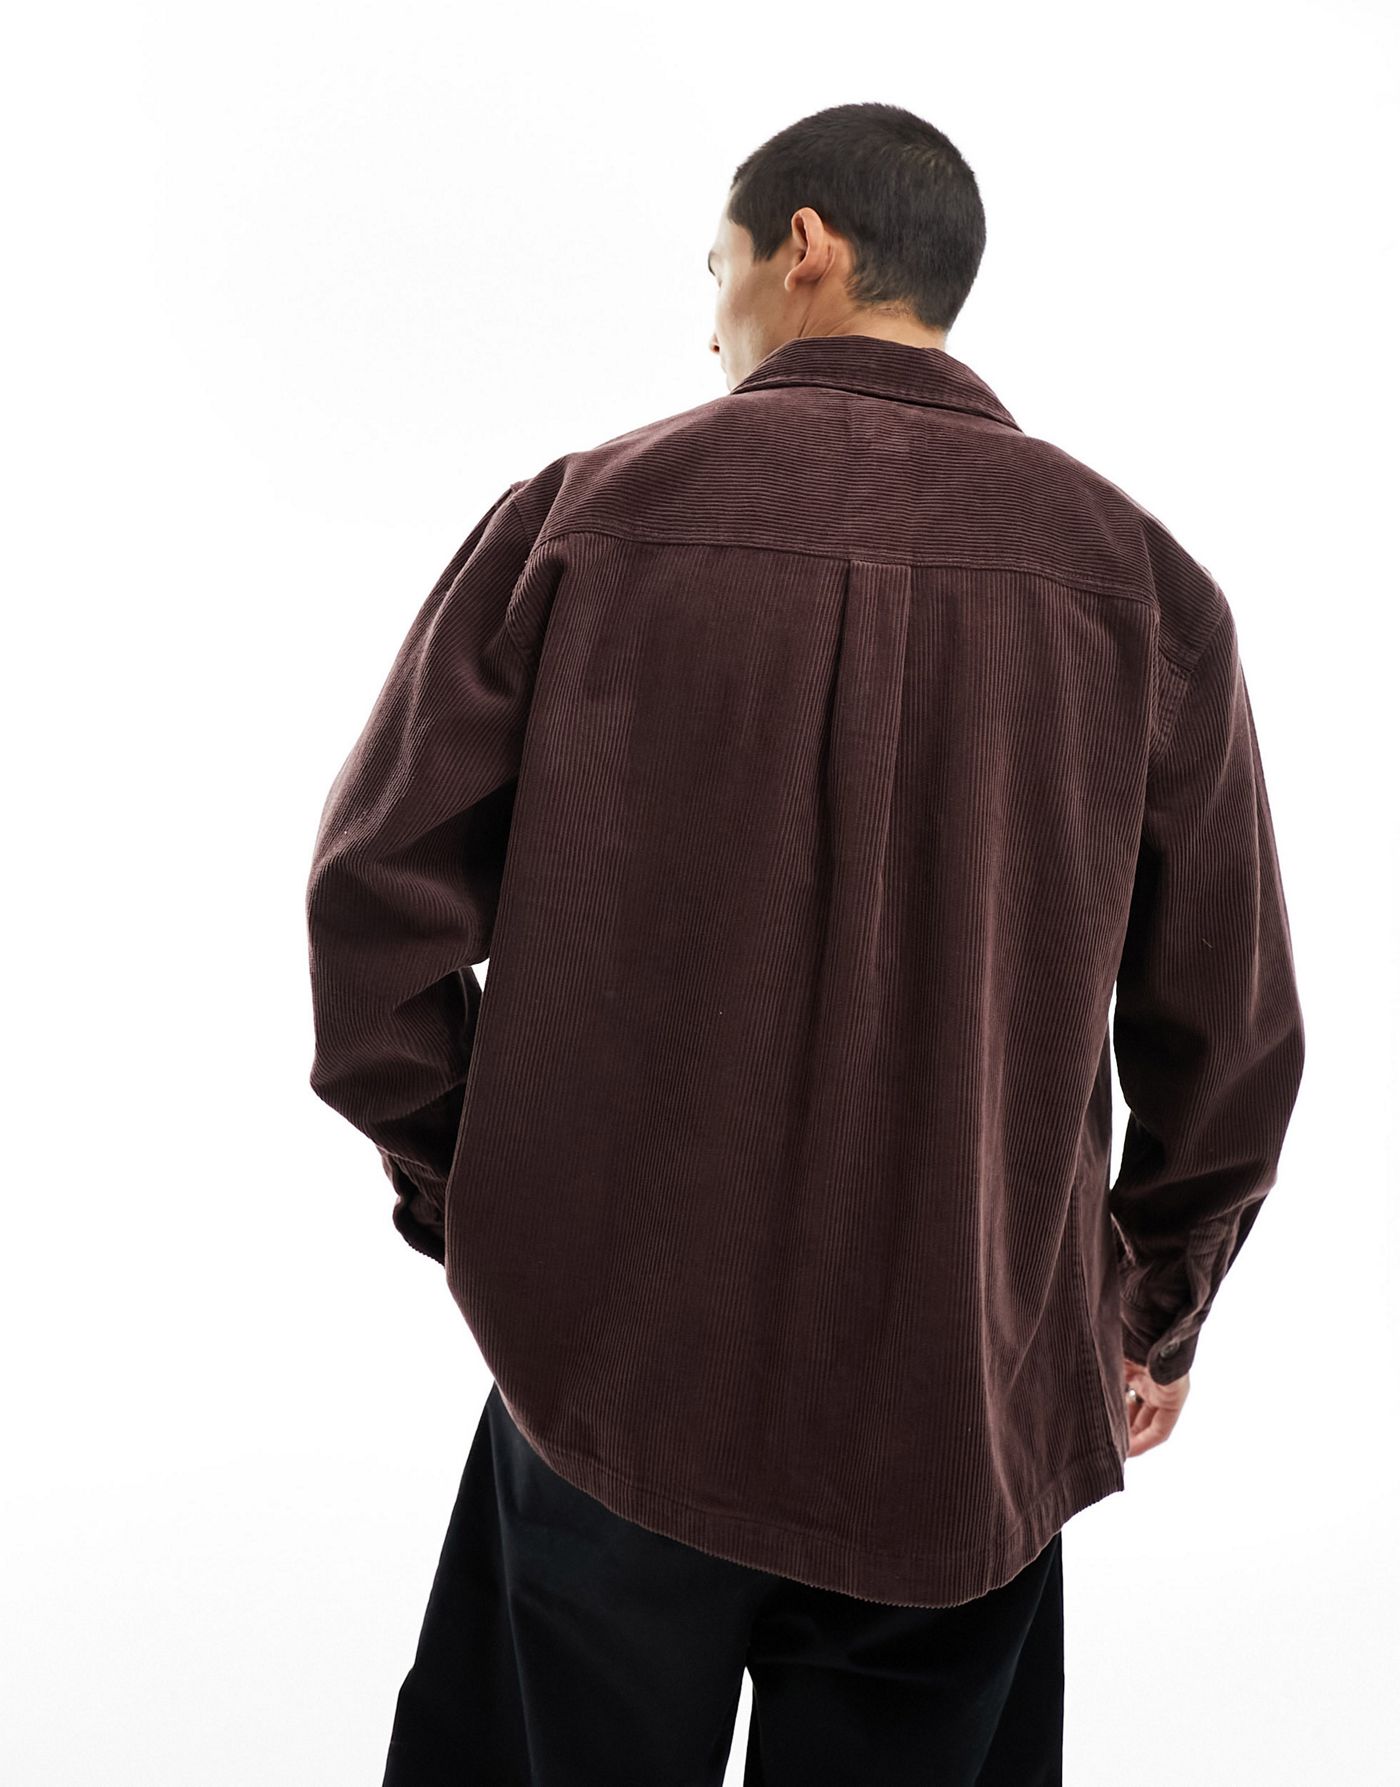 Cotton:On Heavy overshirt brown in brown